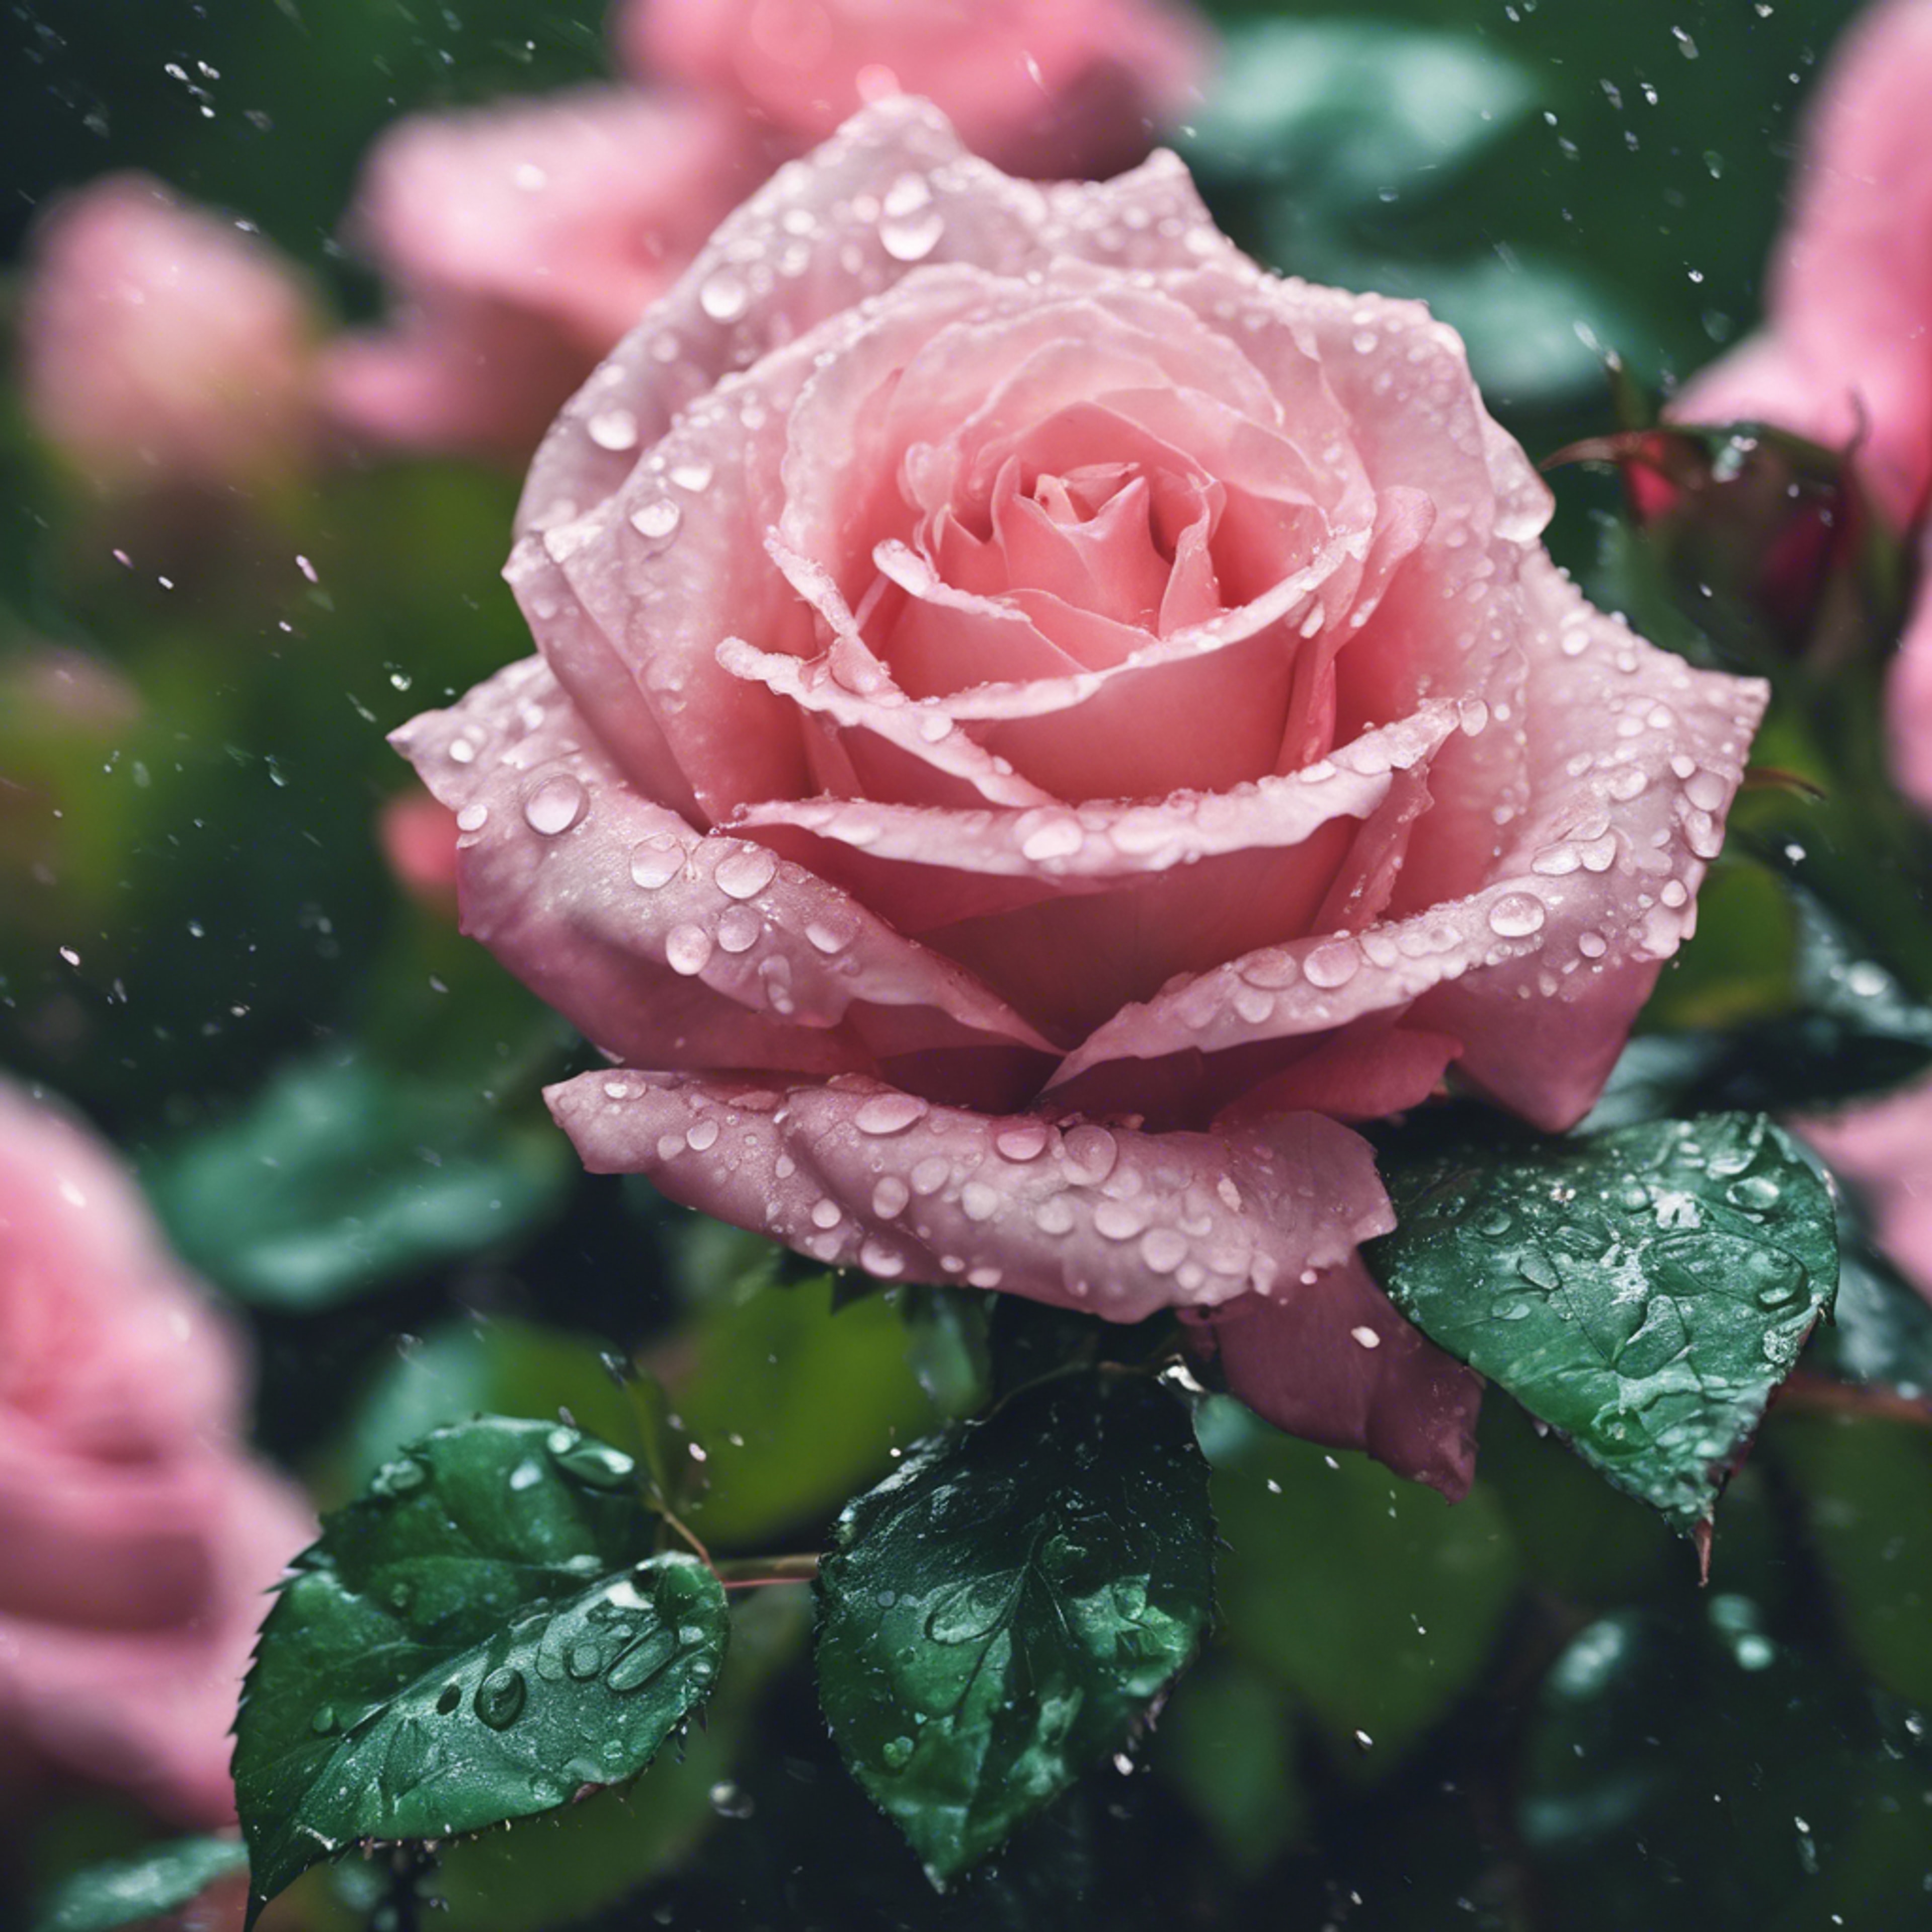 Gentle rain falling on the bright green leaves and pink roses. Wallpaper[2479f95970de45b492b9]